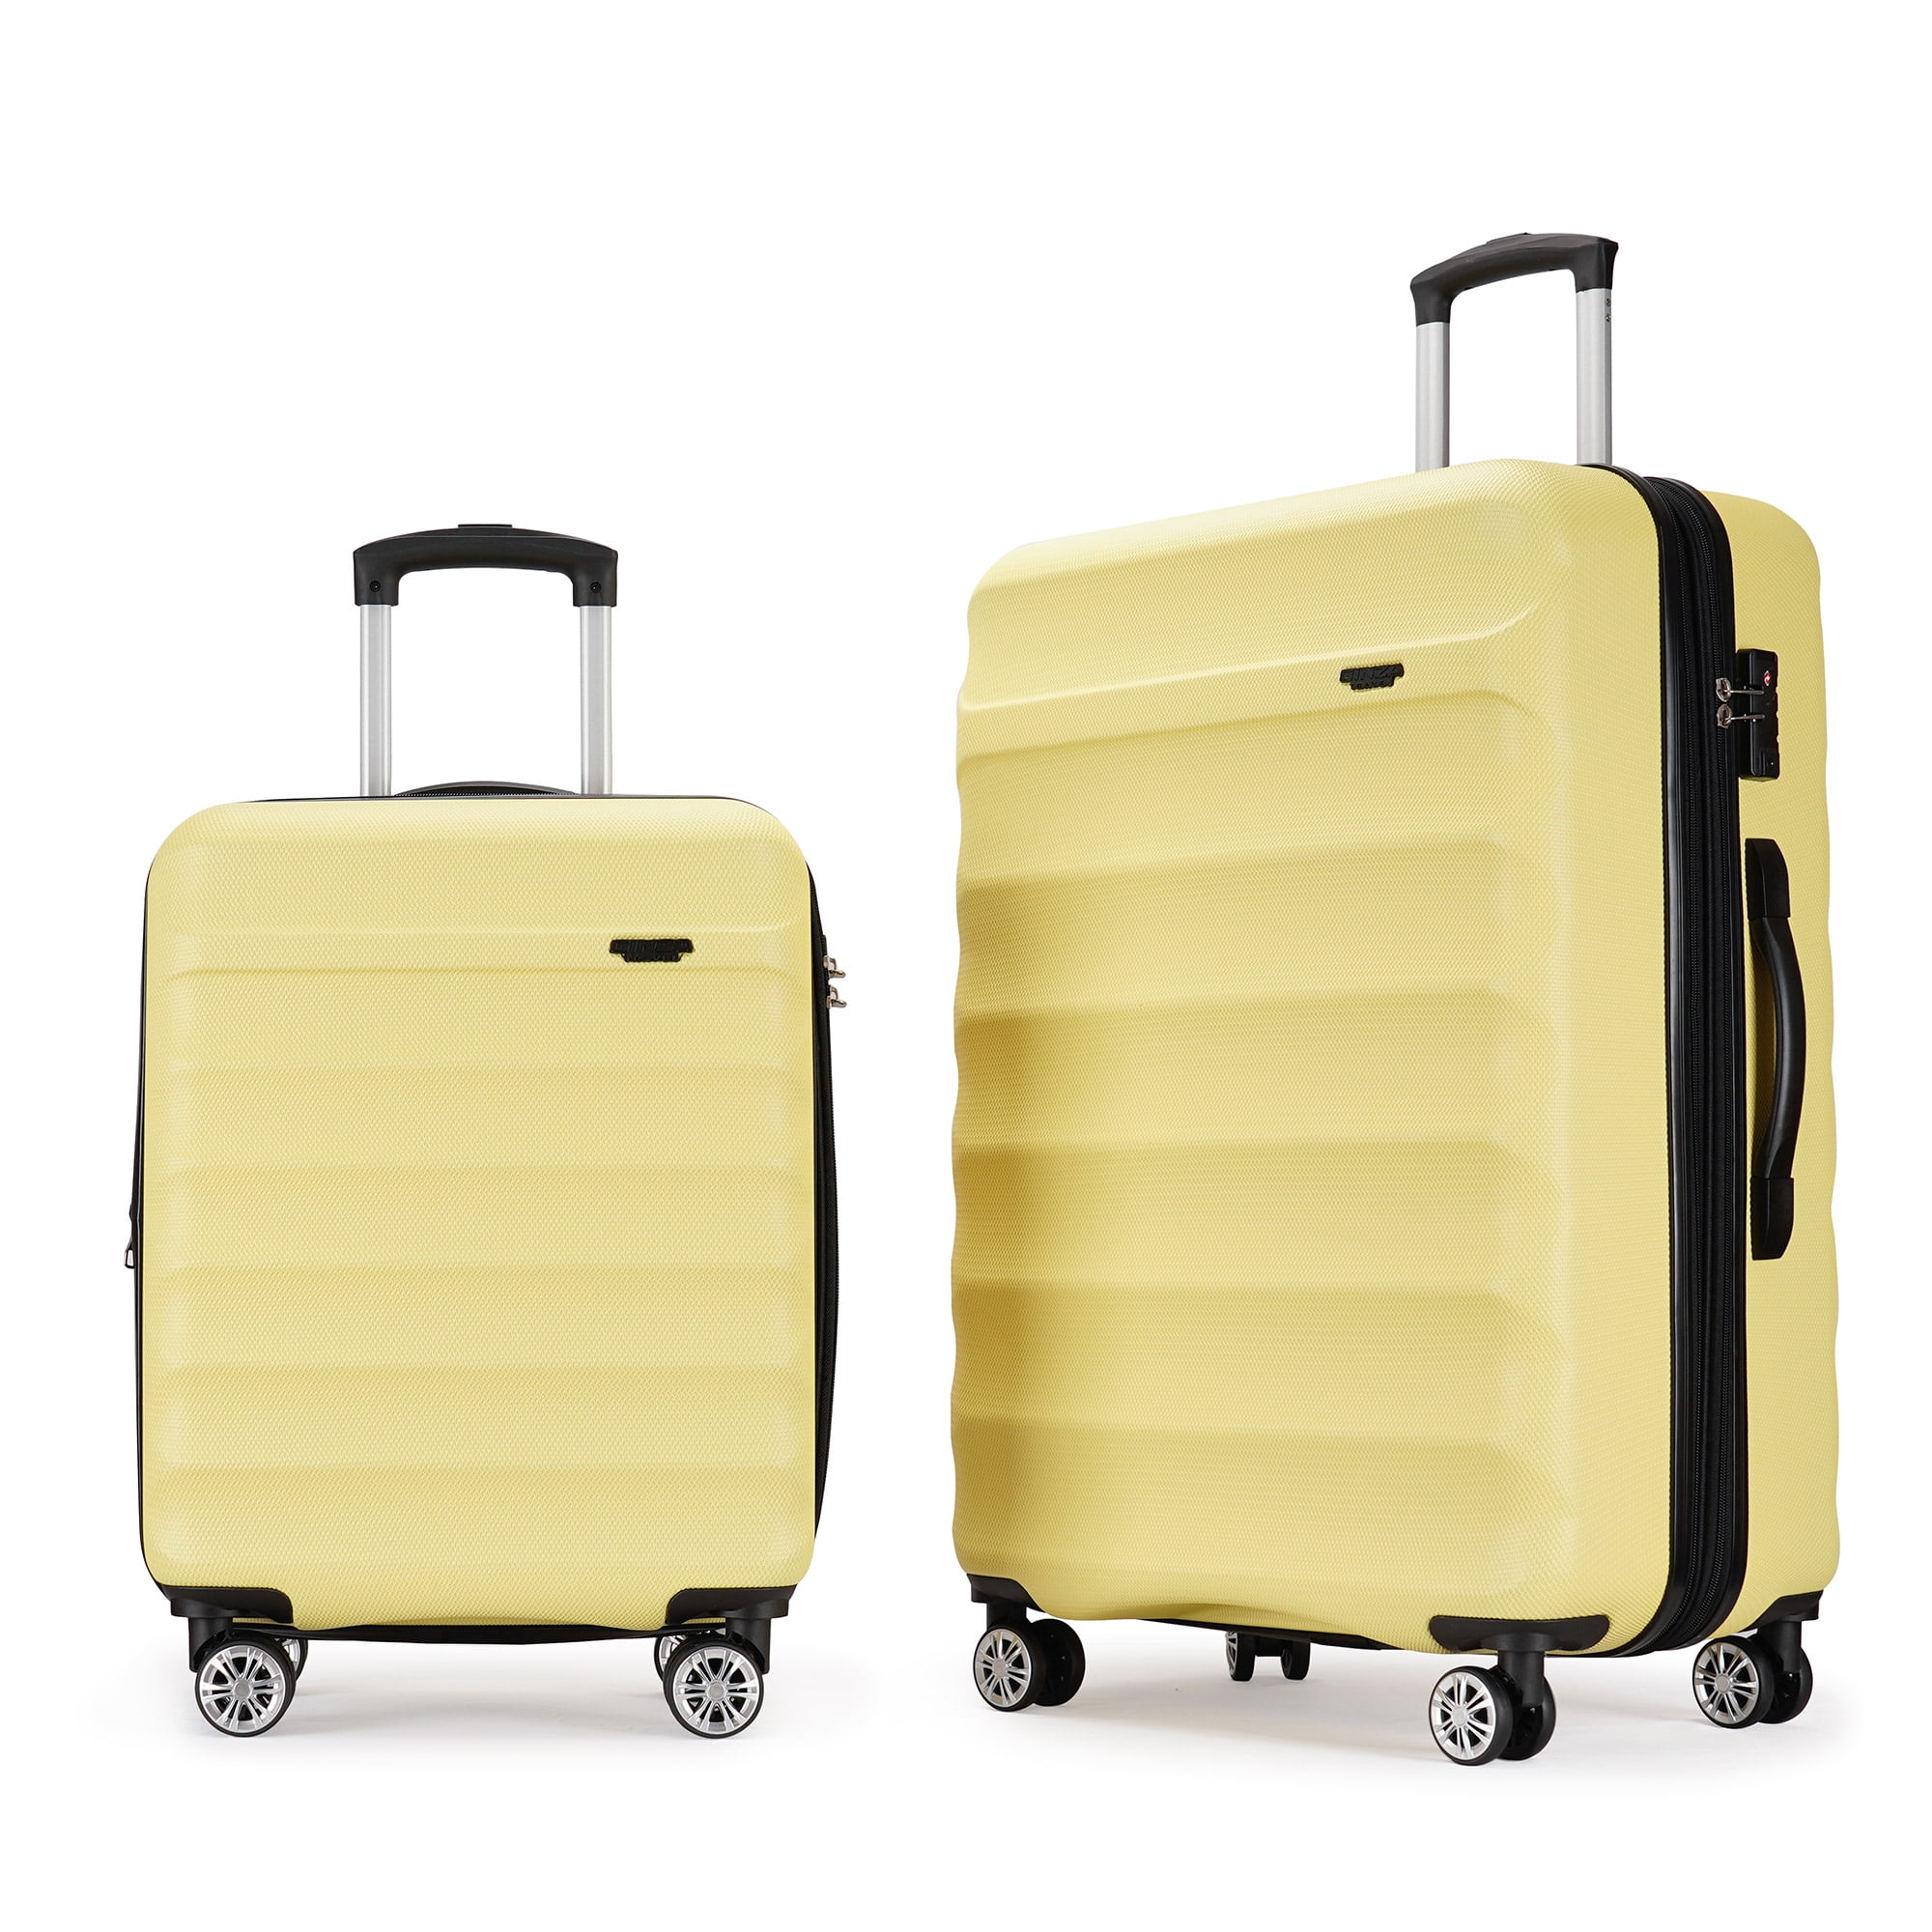 Ginza Travel 2 Piece Luggage Sets Hard Shell Suitcase Set with Double ...